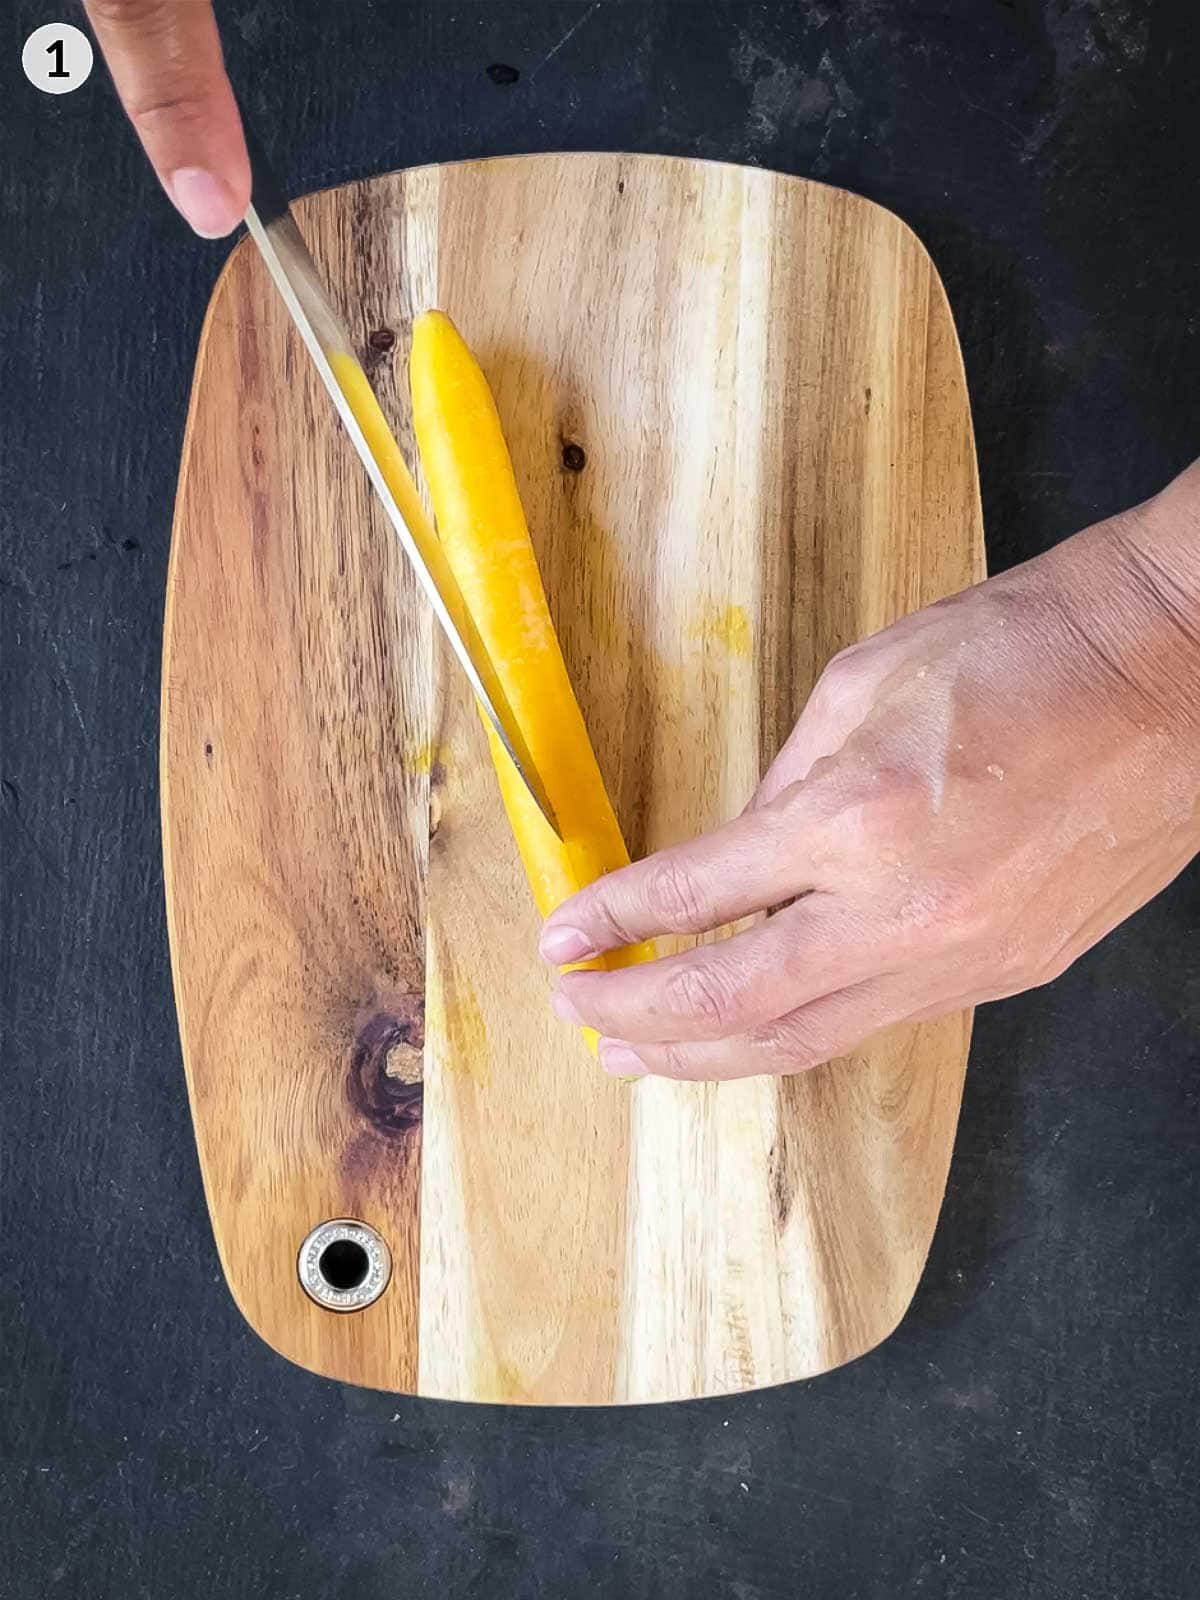 Cutting yellow carrot lengthwise with a knife on a chopping board